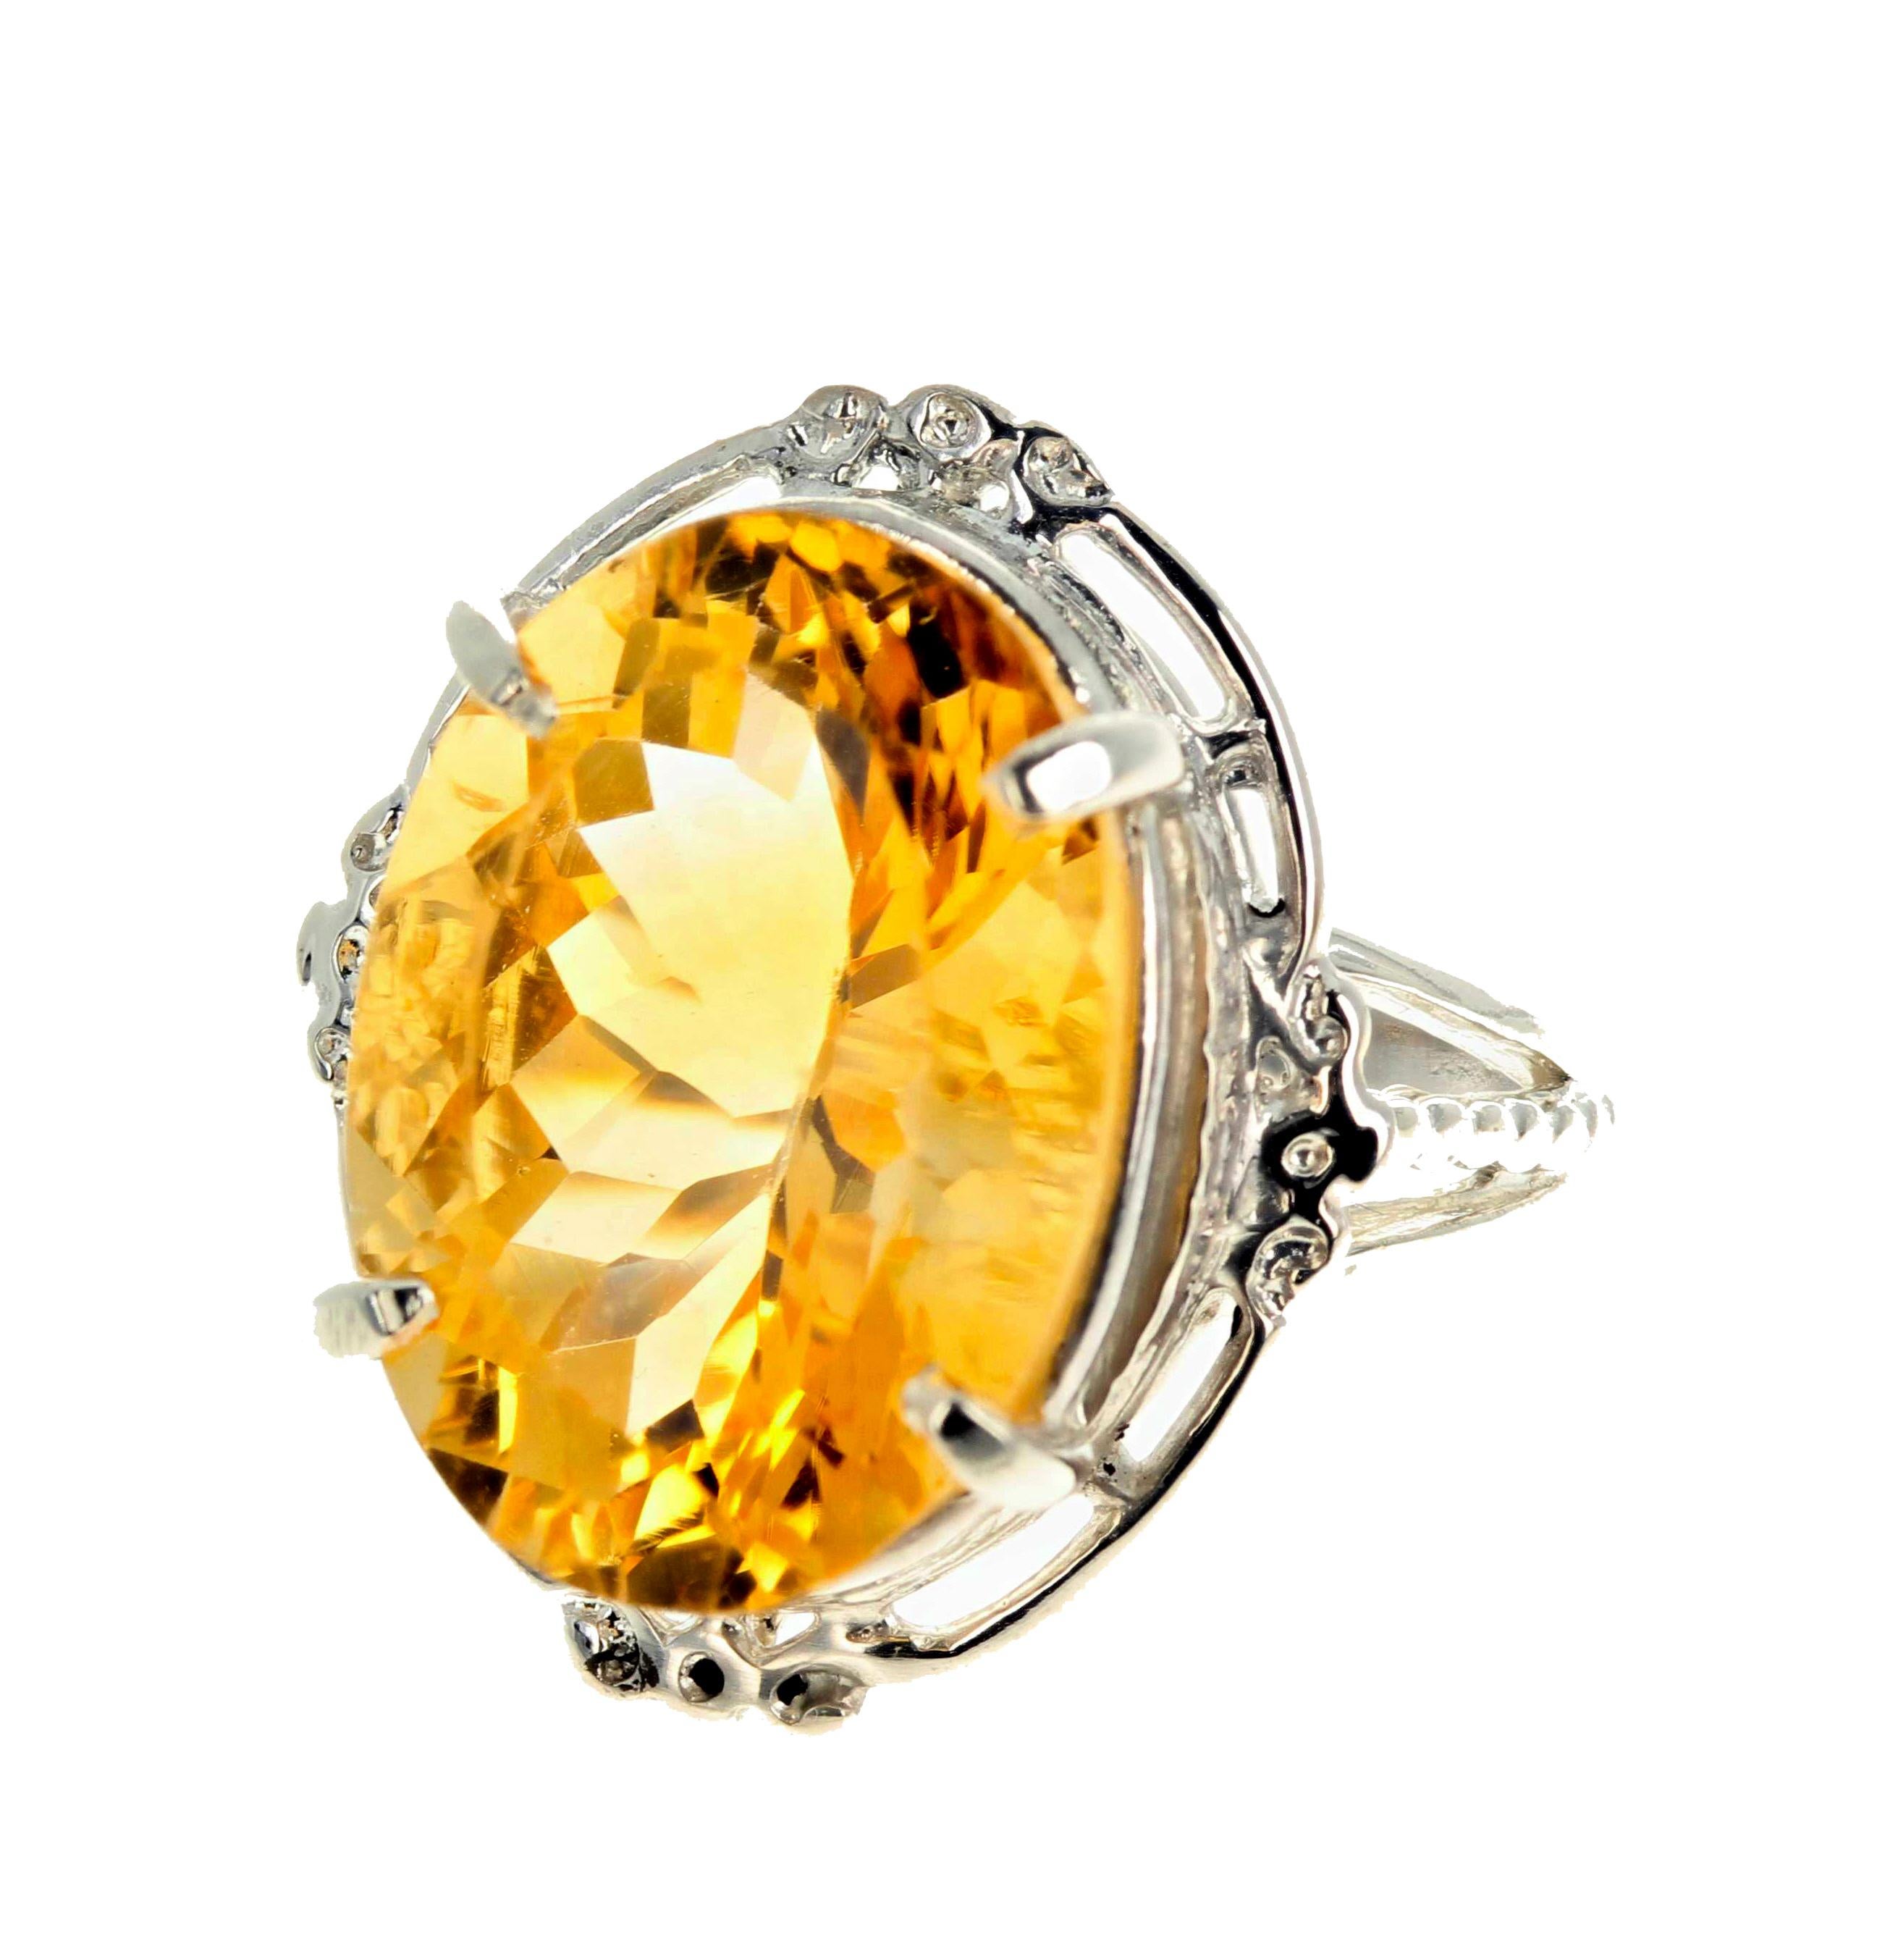 This glittering oval cut natural yellow goldy 11.52 carat Citrine (17.8mm x 13mm) is set in an interesting and unique sterling silver ring size 7 sizable (we size for free).  Citrine is believed to promote success, abundance and clear thinking.  